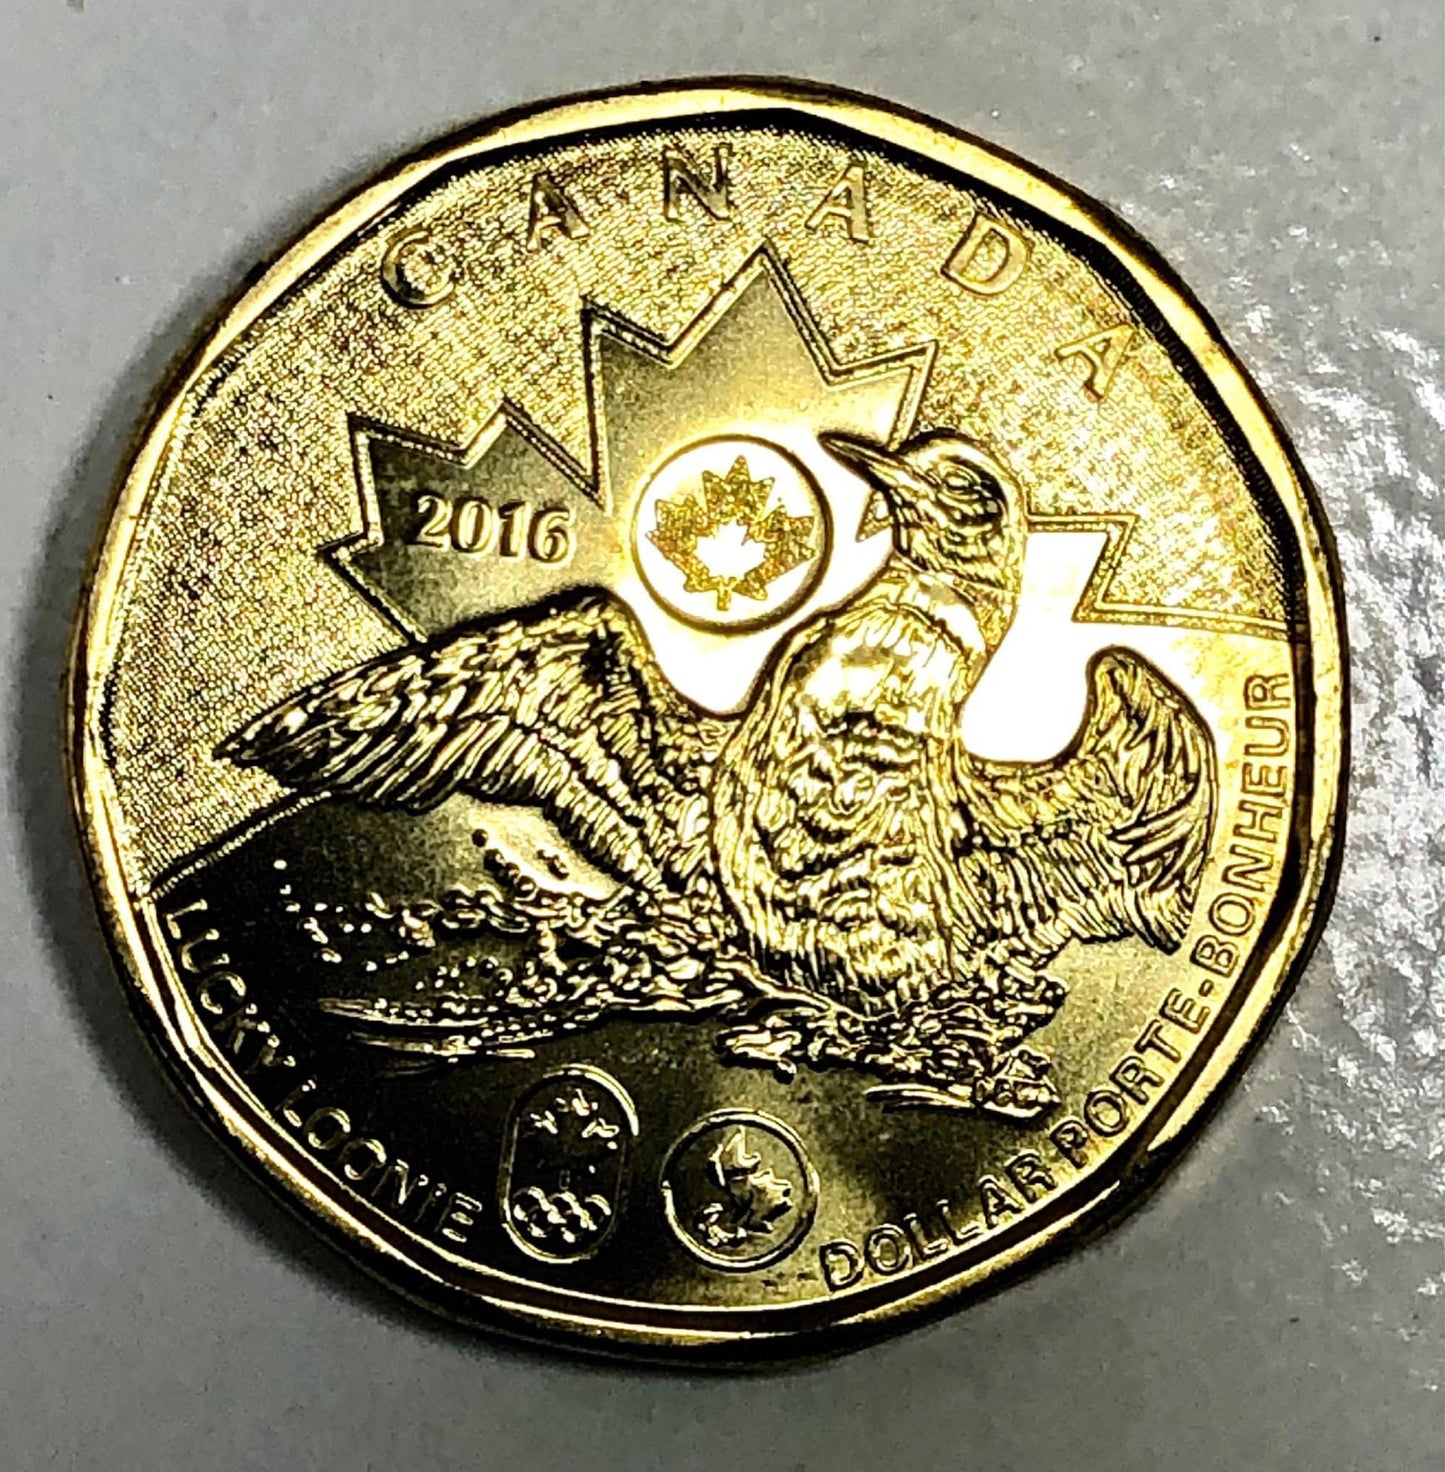 Lucky Loonie Ring 2016 Canada Canadian Dollar Handmade Personal Jewelry Ring Gift For Friend Coin Ring Gift For Him Her World Coin Collector